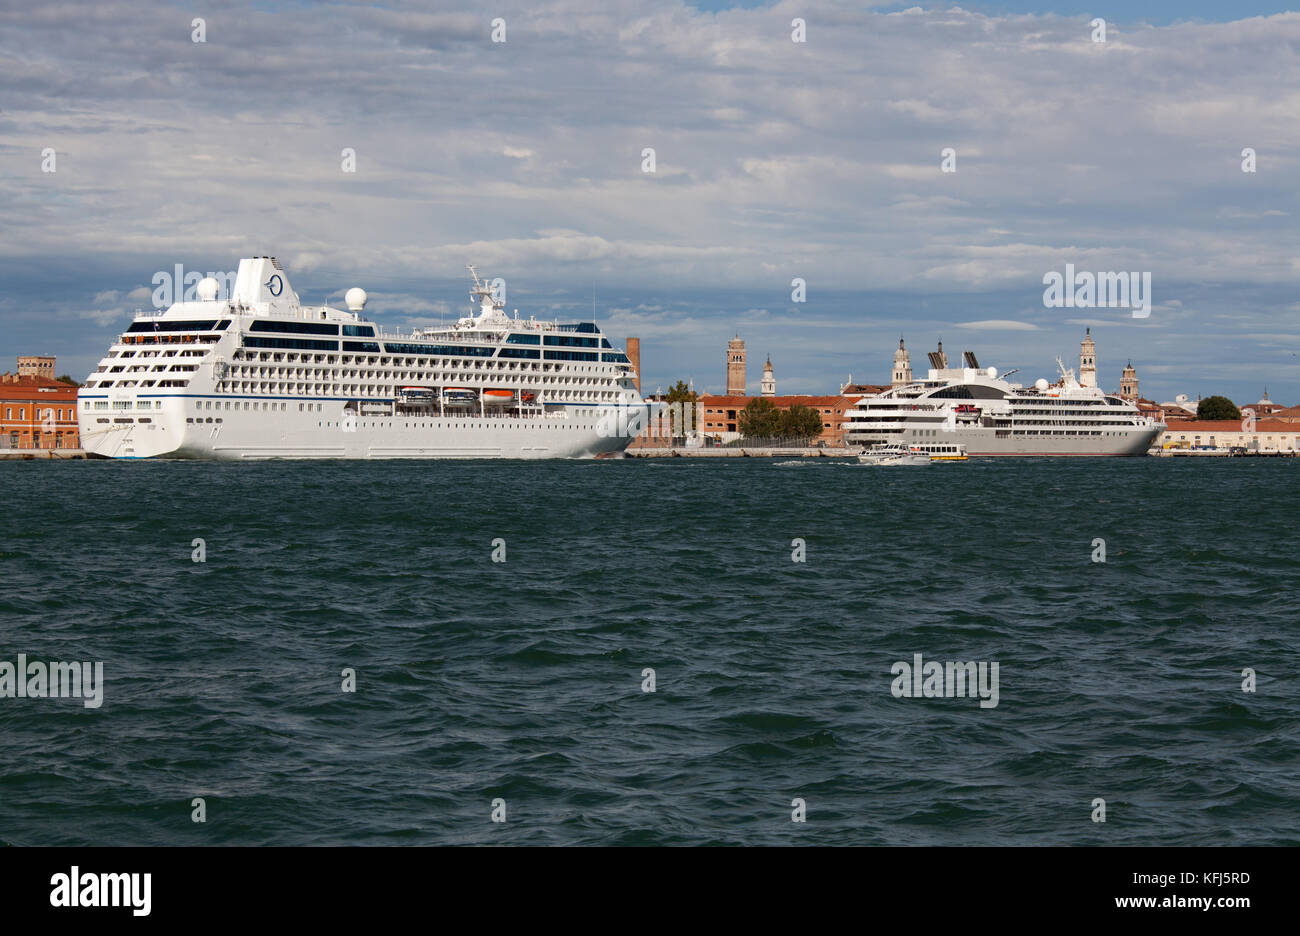 City of Venice Italy. Picturesque view of the cruise ship MS Serina berthed at Venice’s San Basilio cruise terminal. Stock Photo